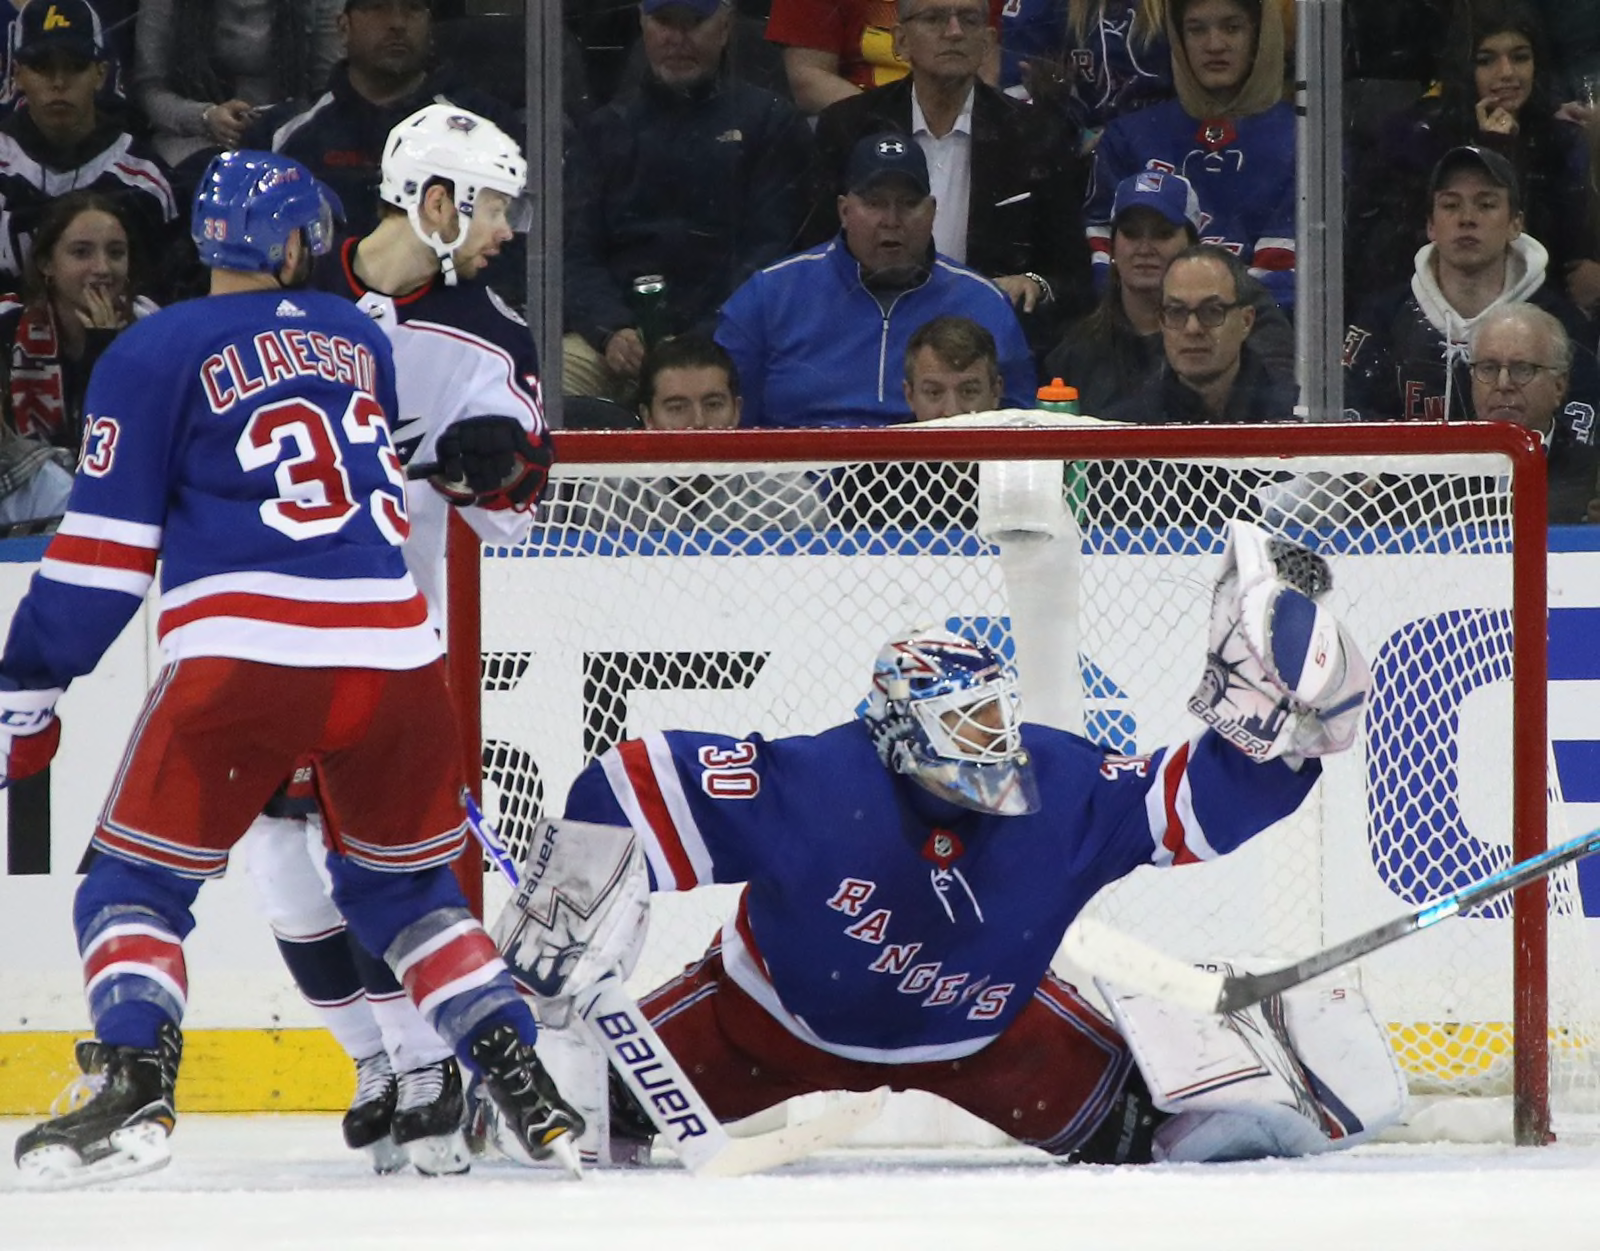 Henrik Lundqvist reflects on his Rangers rise to greatness